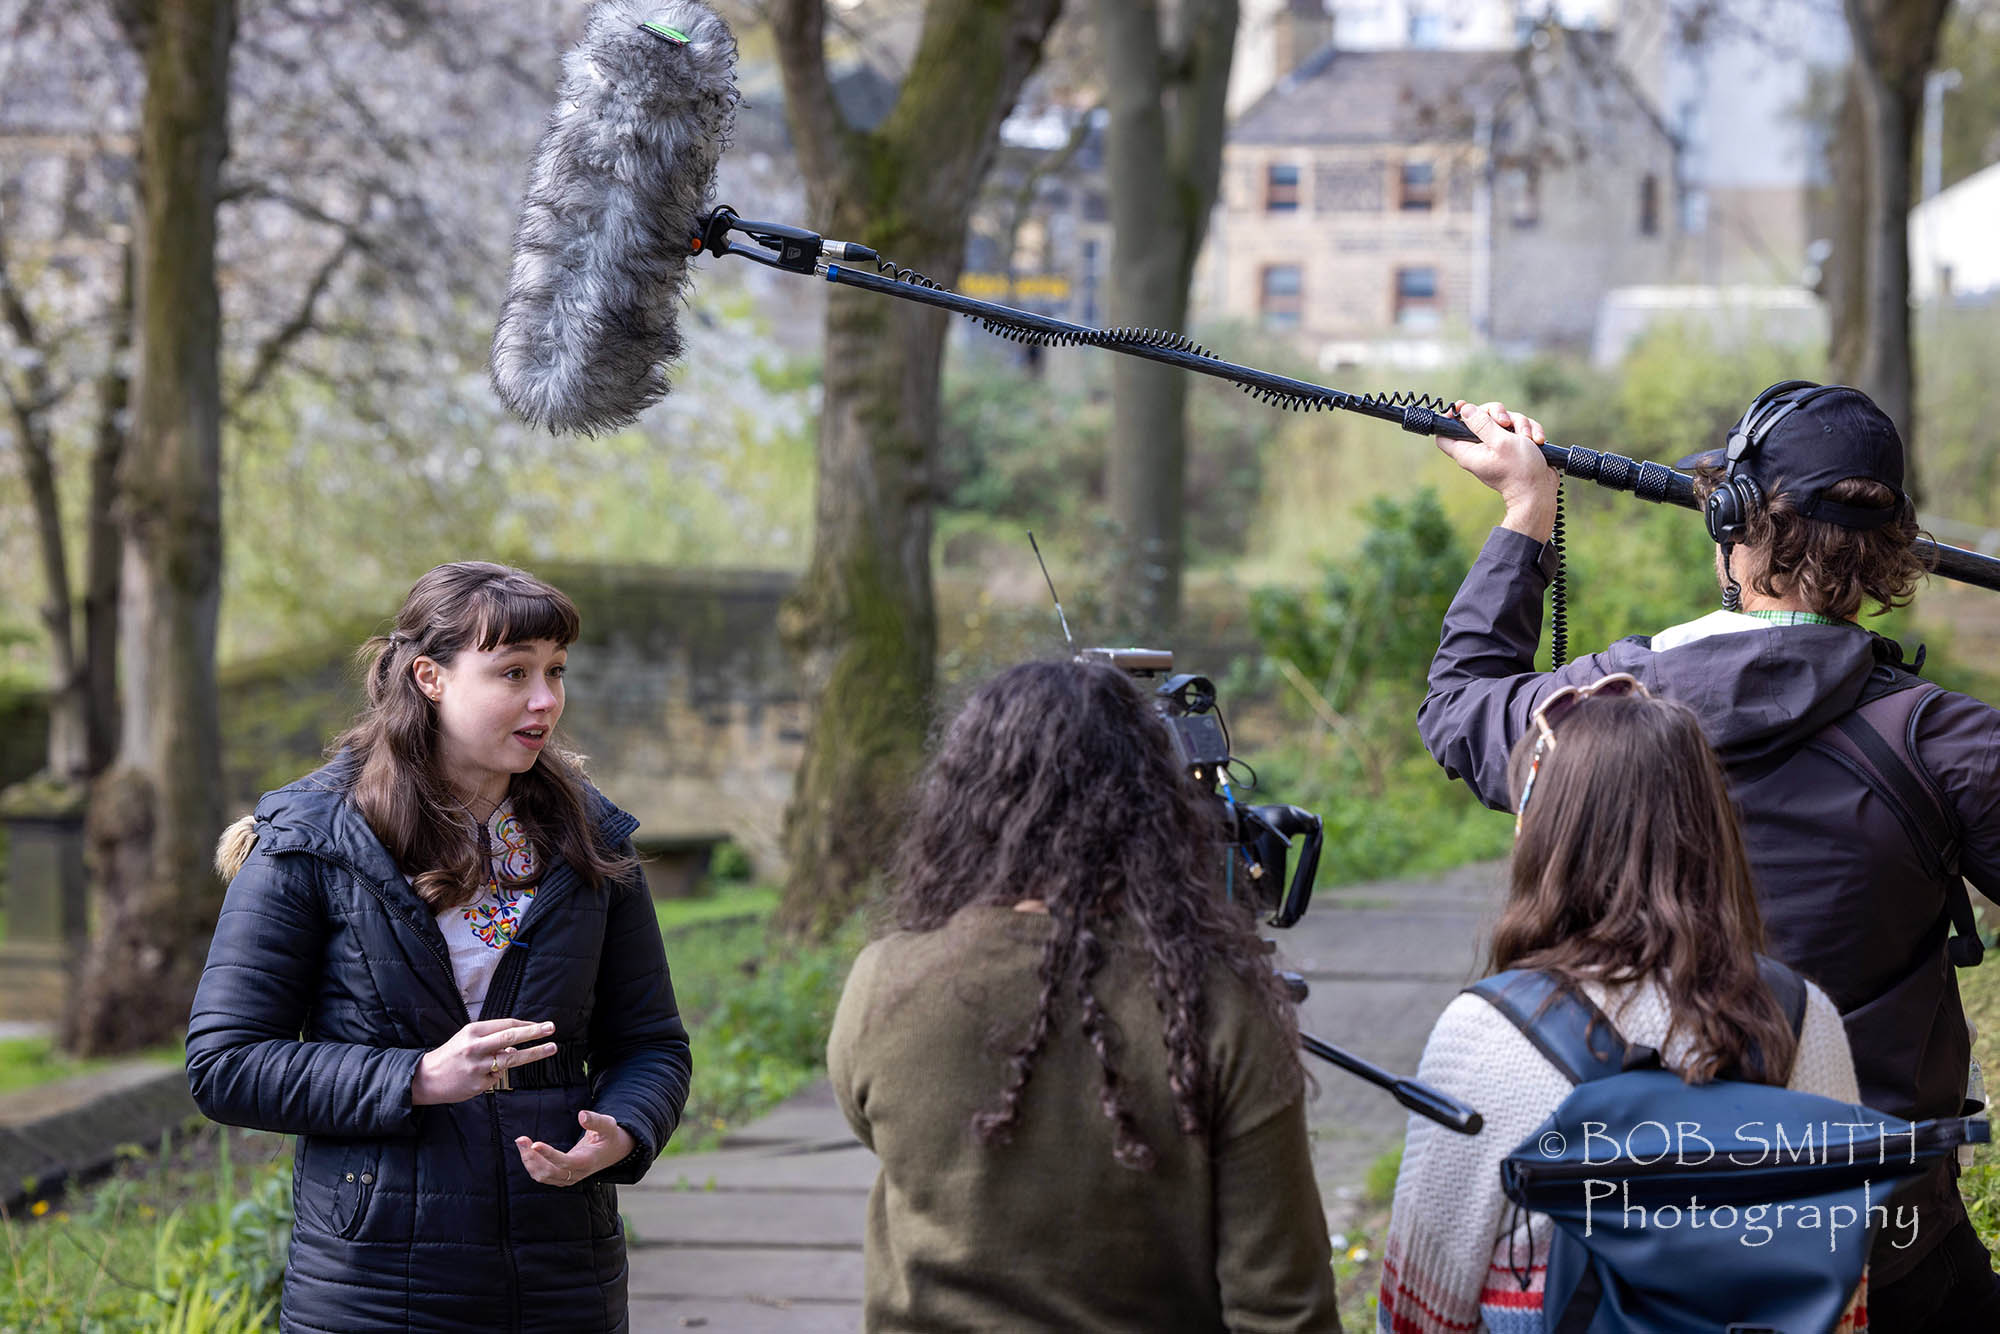 Keighley Creative festival and events producer Cat Murray is interviewed for the BBC programme Escape to the Country.